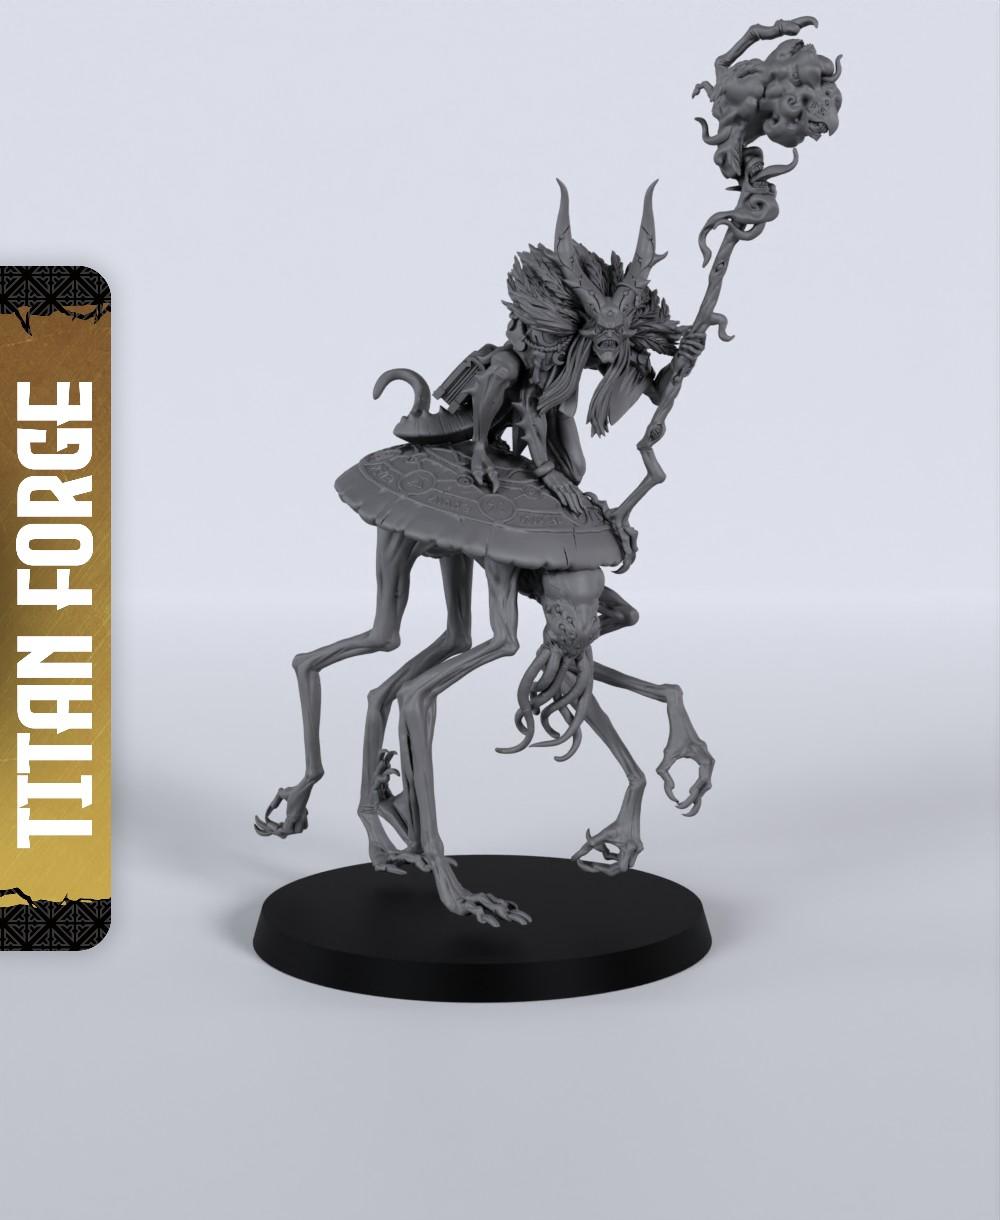 Wild Sorcerer - With Free Dragon Warhammer - 5e DnD Inspired for RPG and Wargamers 3d model